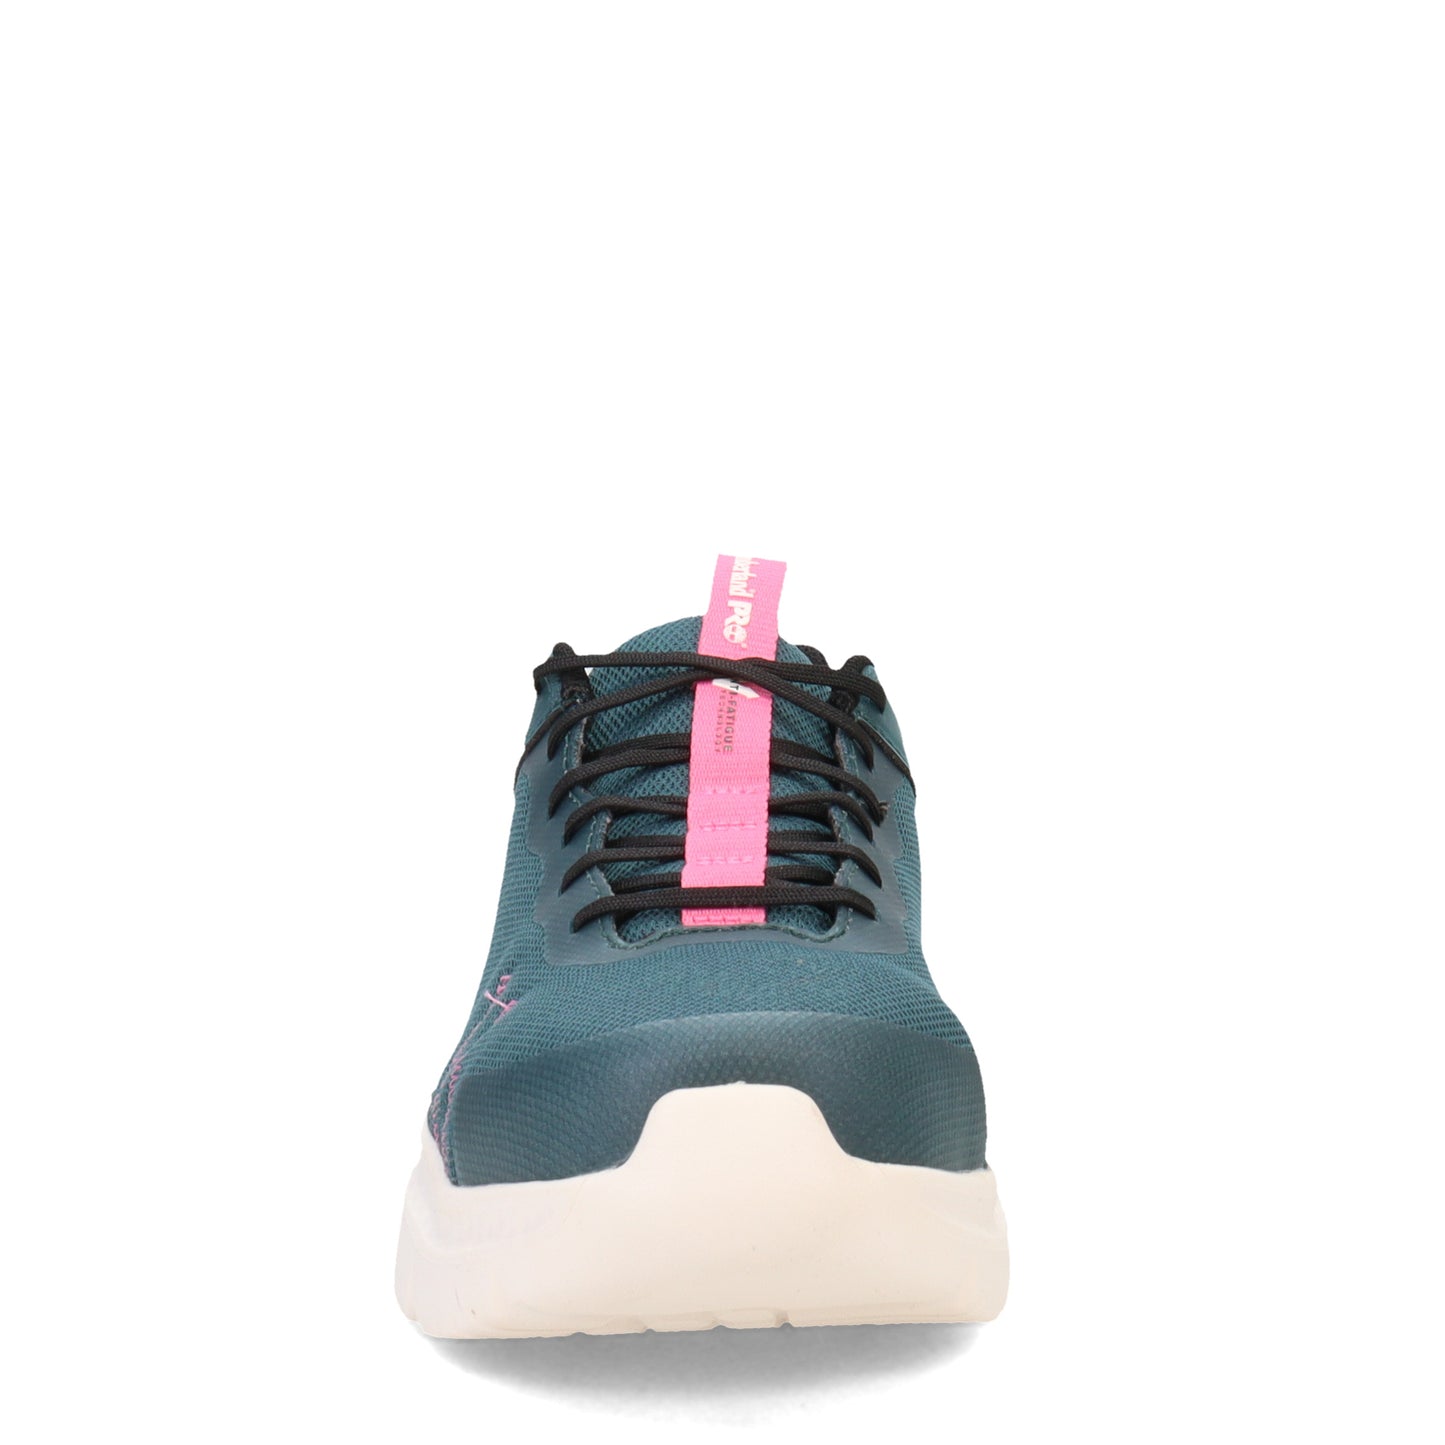 Peltz Shoes  Women's Timberland Pro Setra Low Comp Toe Work Shoe Green/Teal/Pink TB0A5RTJ357